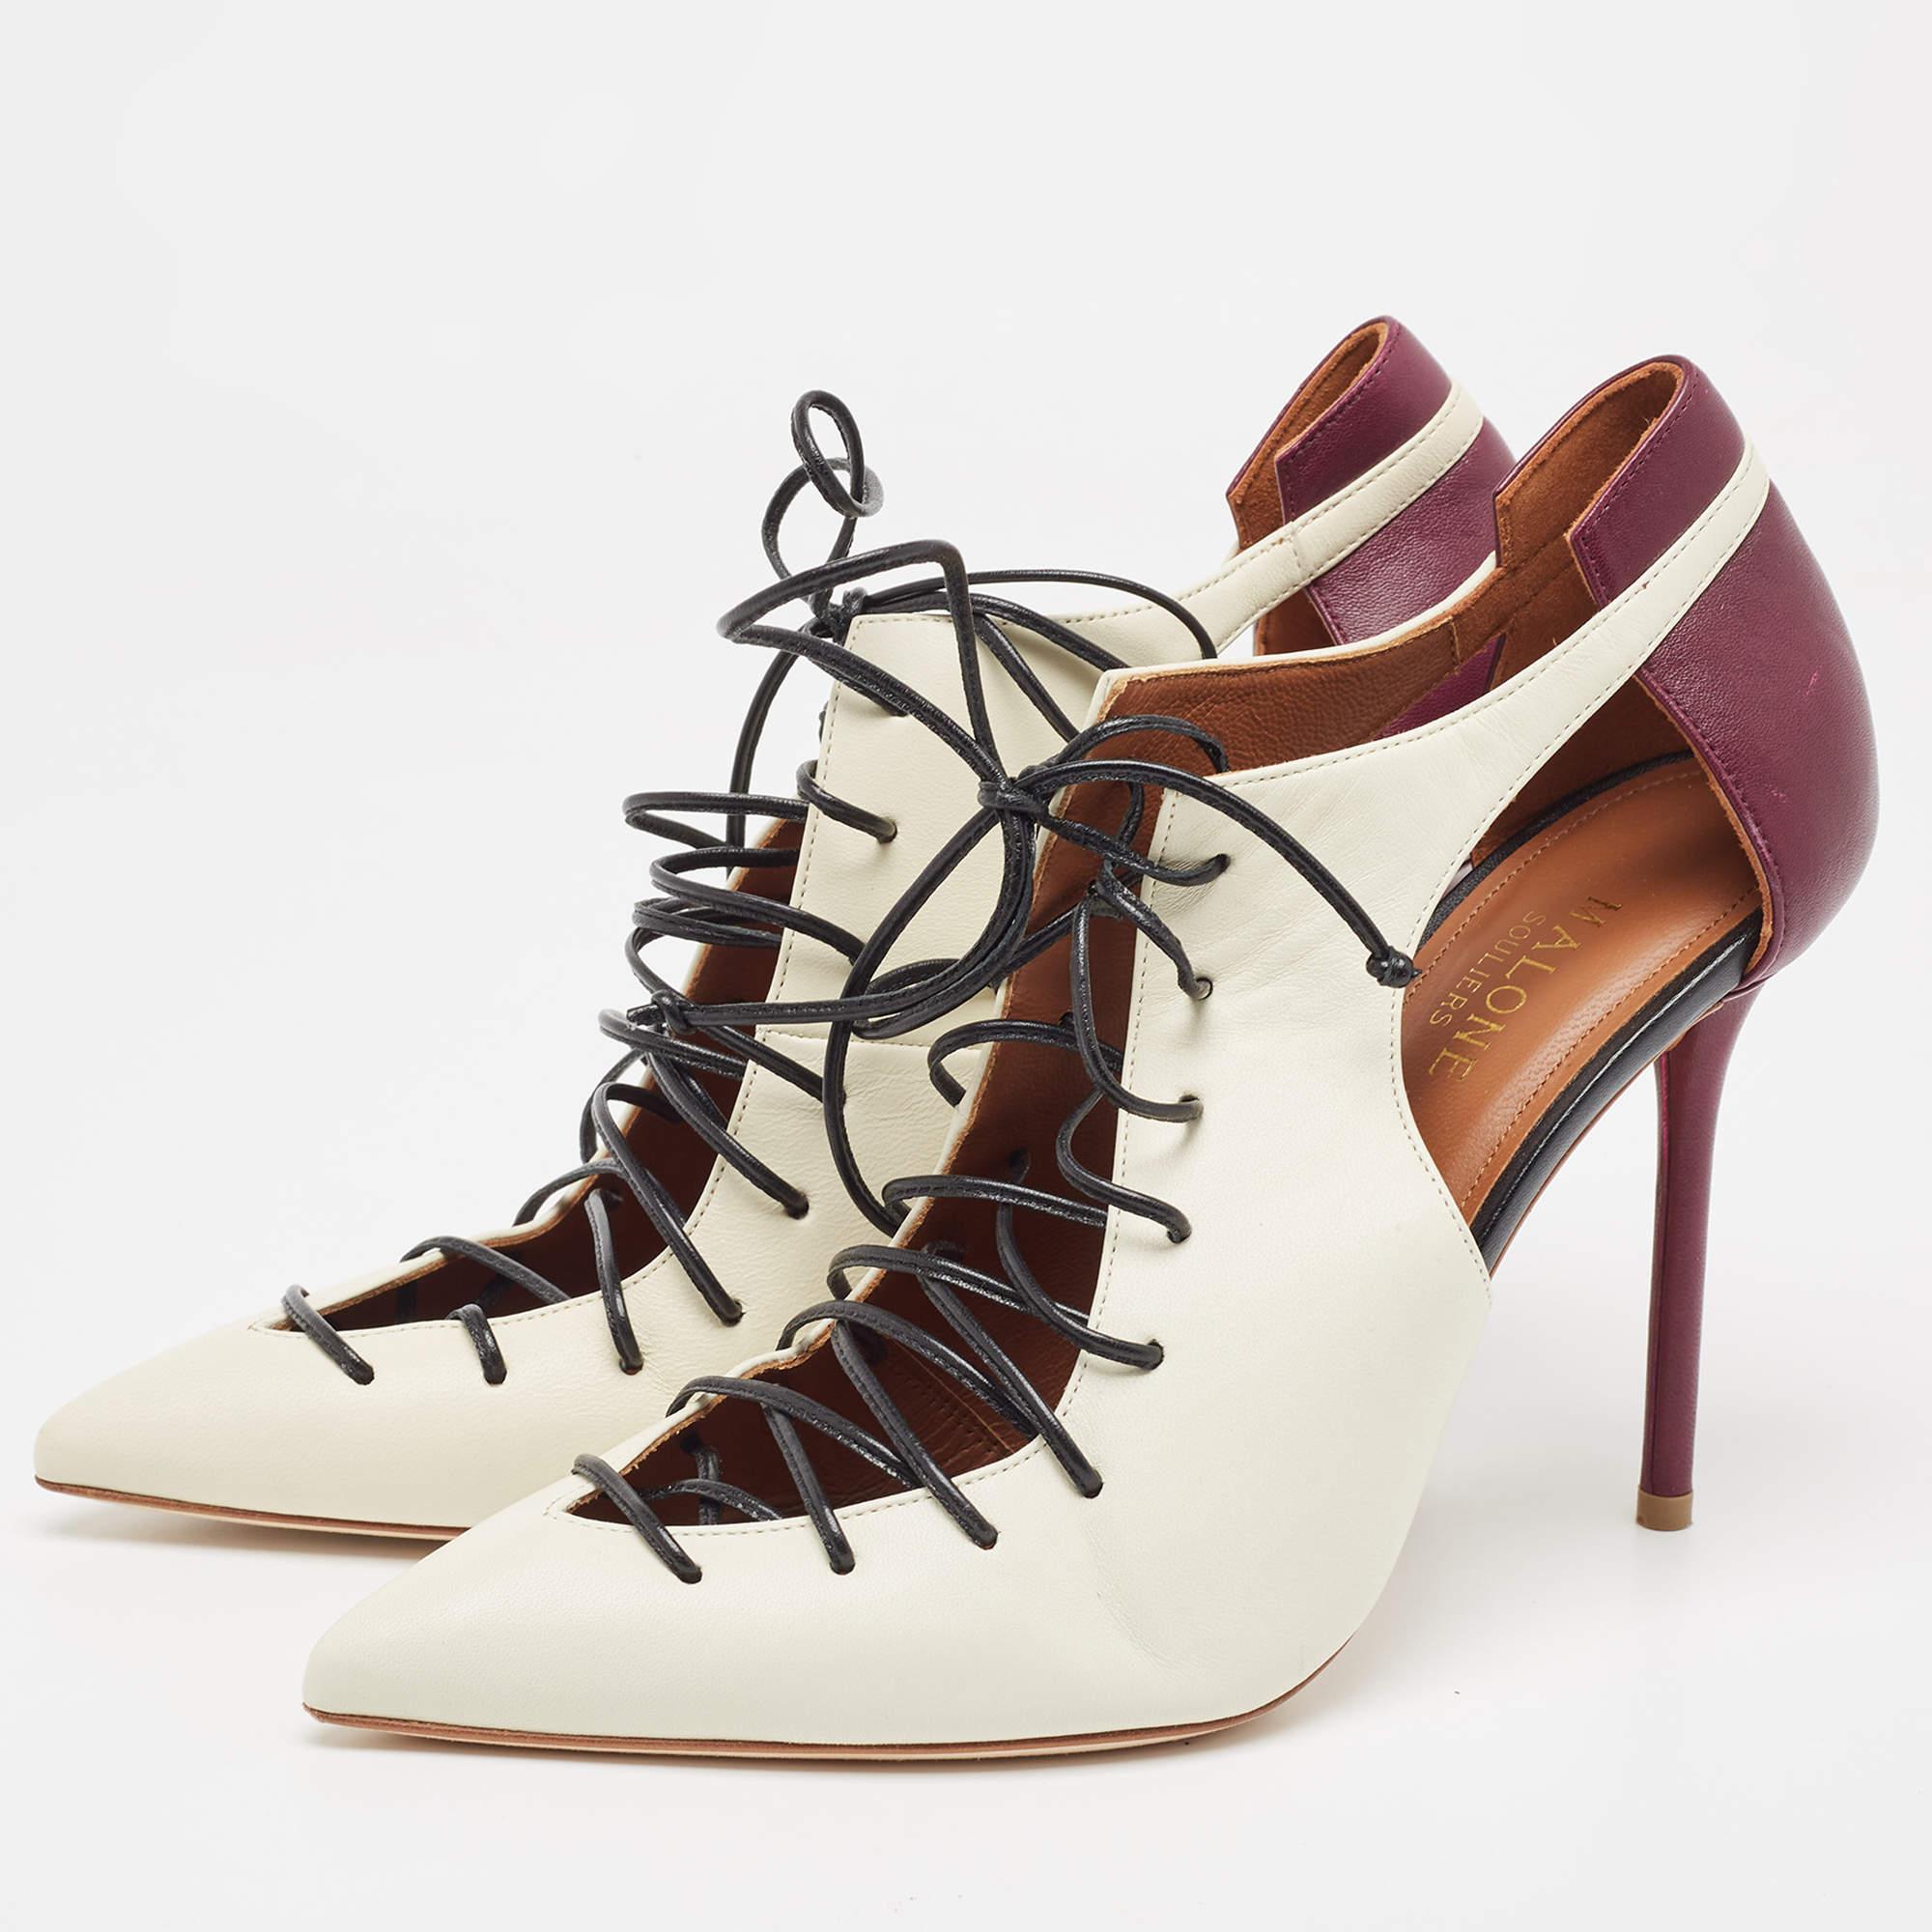 Malone Souliers' signature 'Montana' pumps have become a contemporary classic, and in a sophisticated palette, this pair is a perfect balance of elegance and chic. Made in Italy from leather, they exude luxury. Let the lace-up, pointed-toe pumps